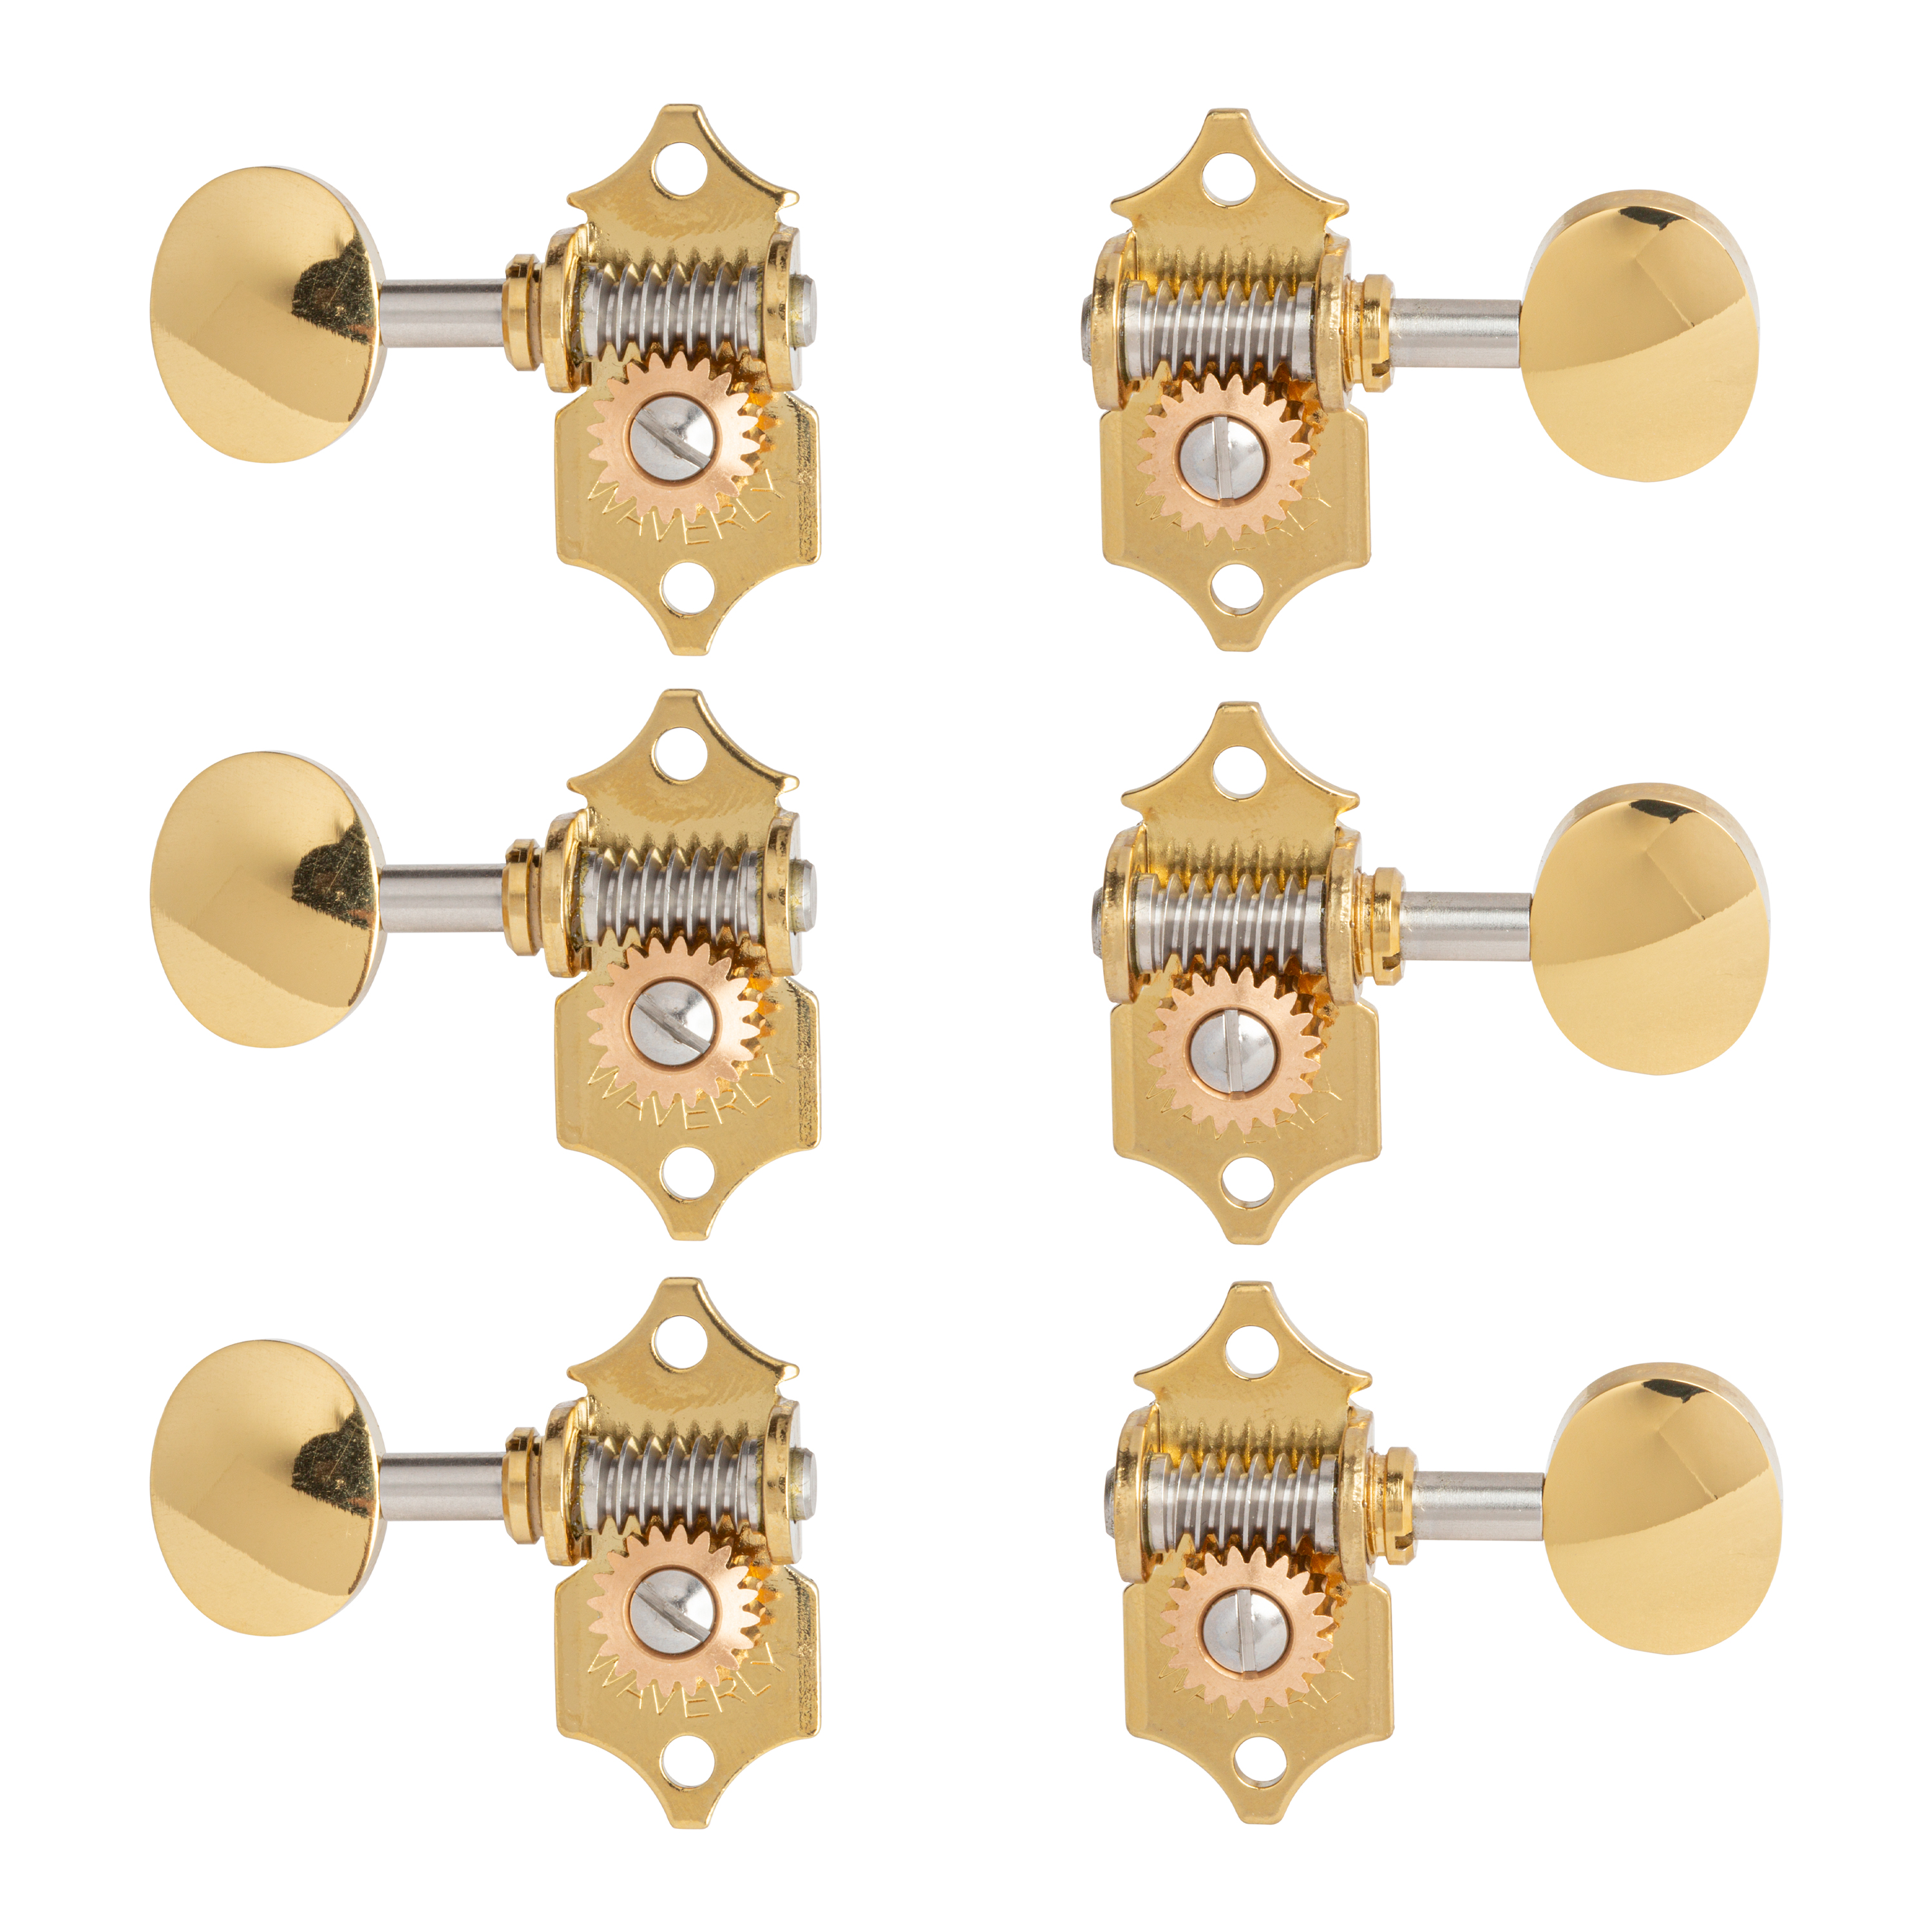 Waverly High Ratio Guitar Tuners with Vintage Oval Knobs for Solid Pegheads